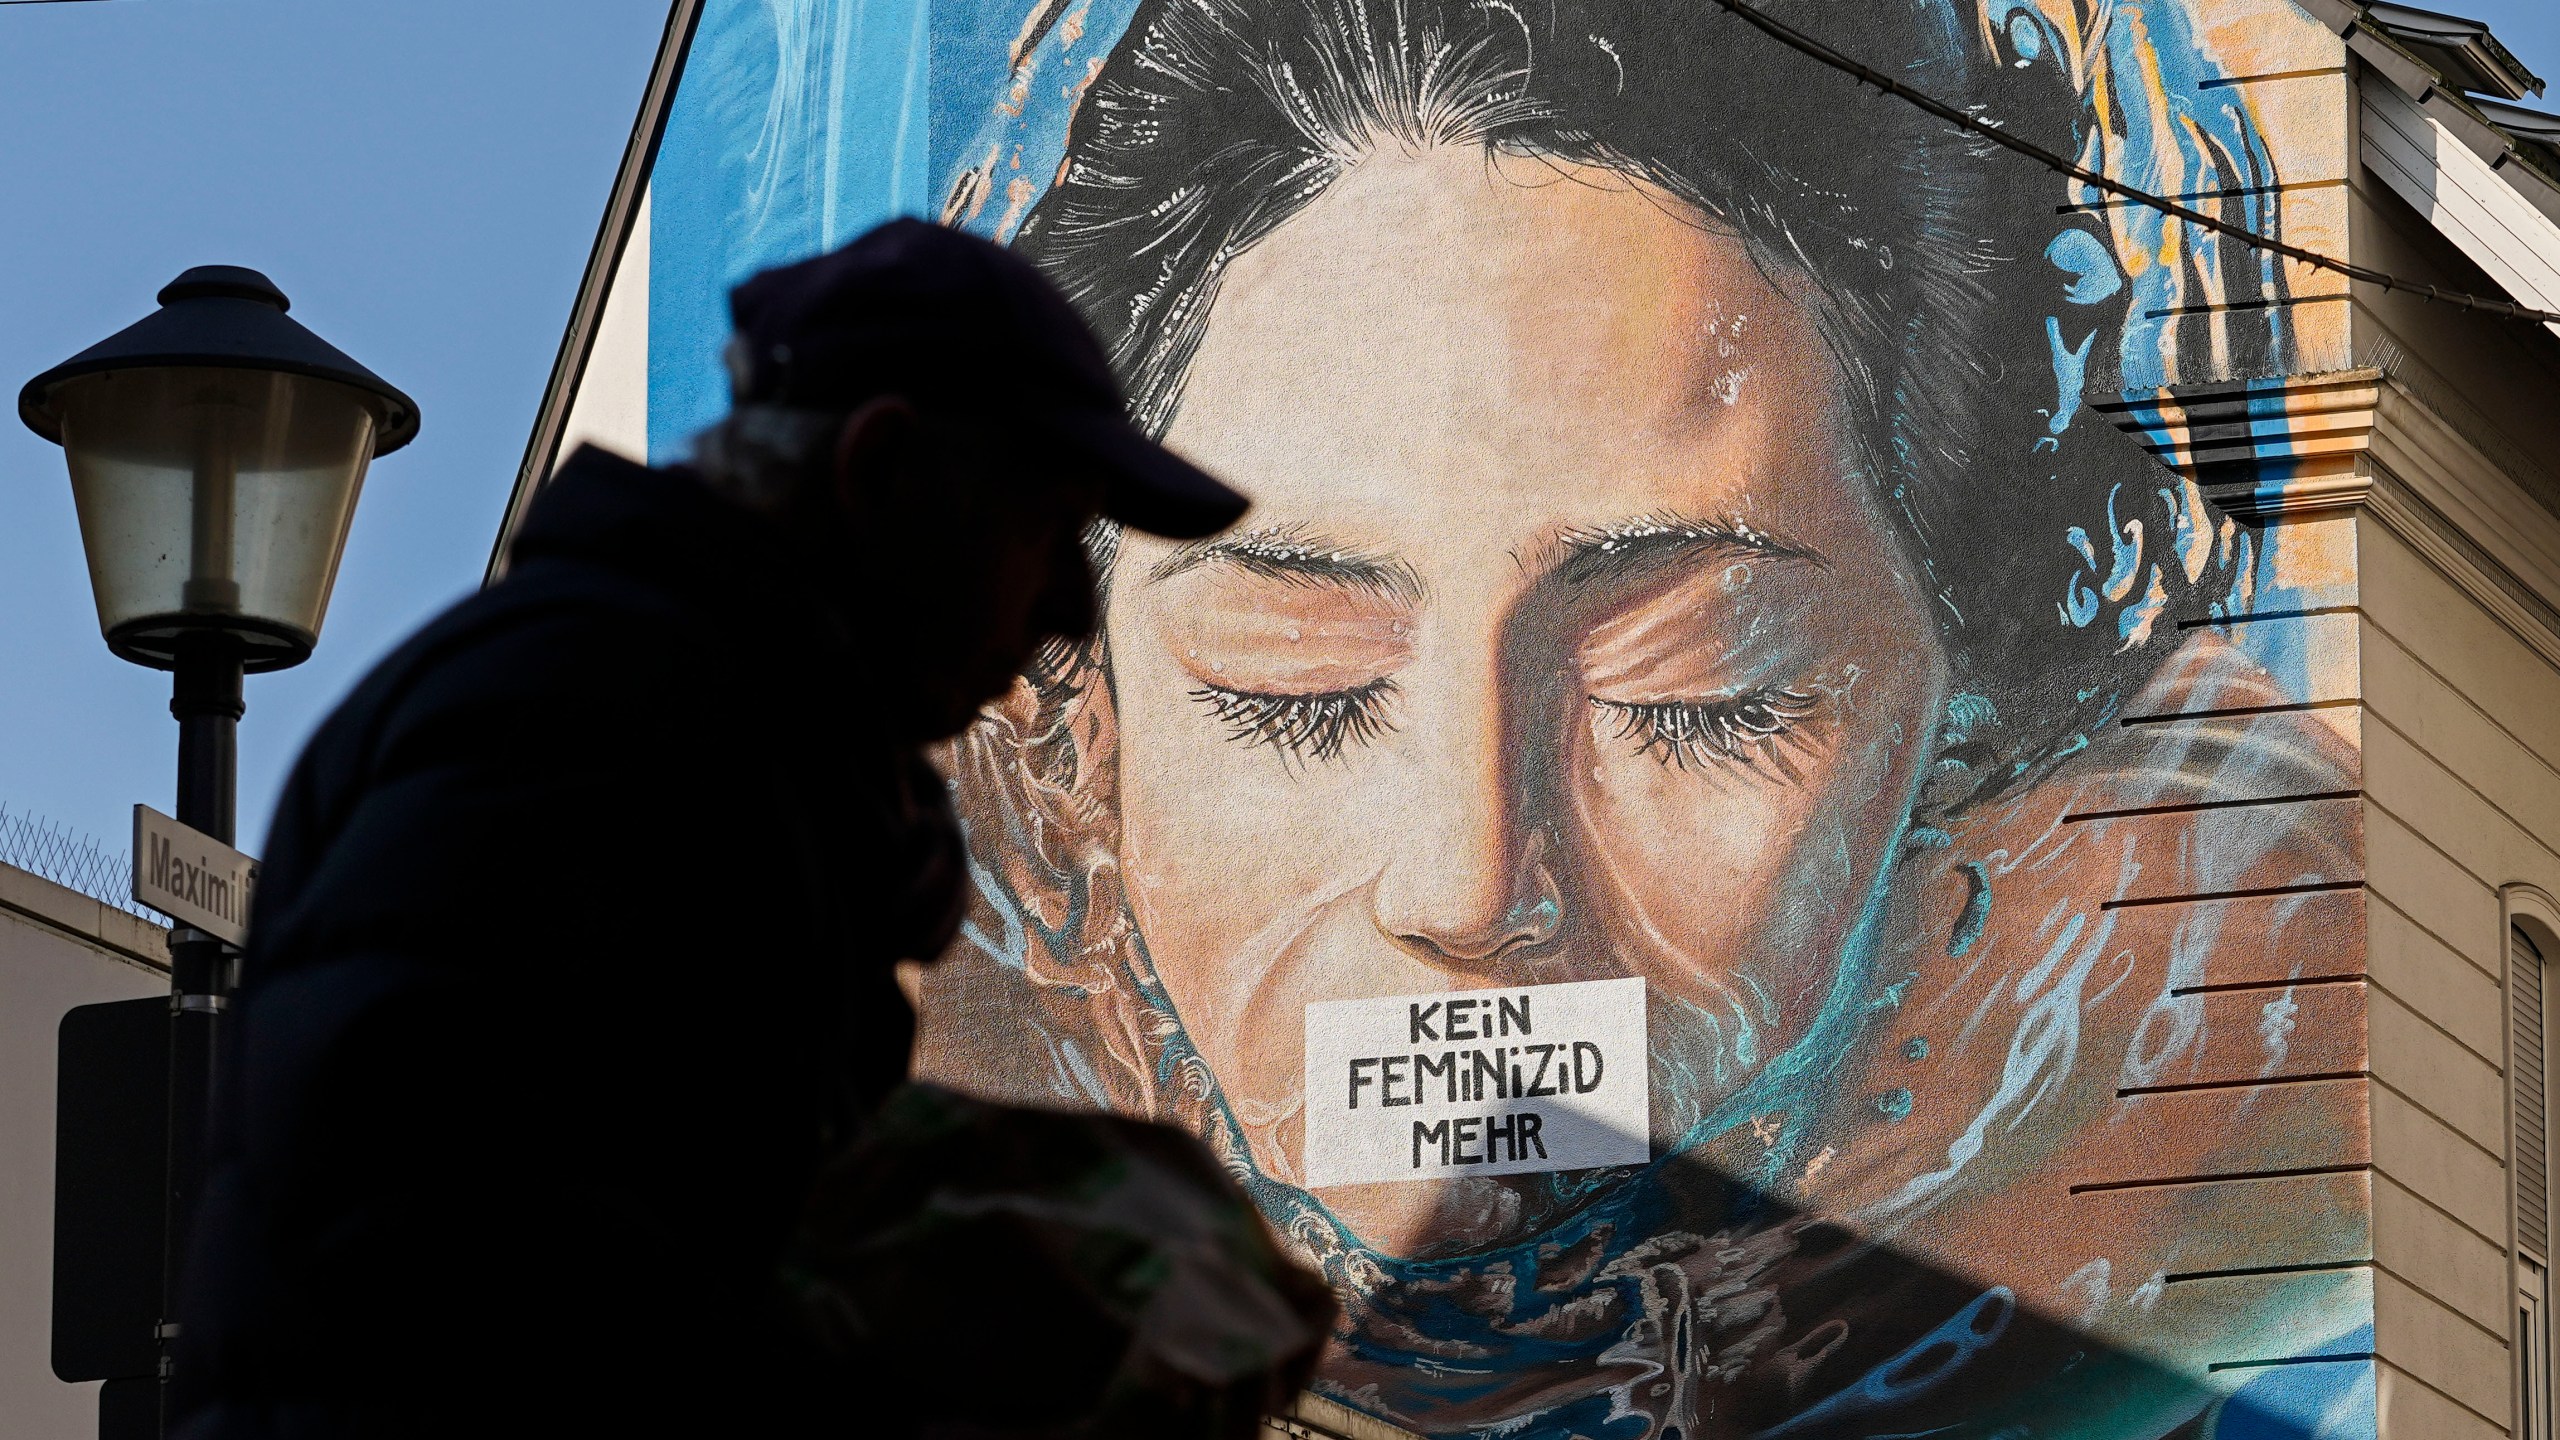 A man passes a large protest painting against hate crime against women, reading "no more femicide" at a house wall in Gelsenkirchen, Germany, on the International Women's Day, Friday, March 8, 2024. Marches, demonstrations and conferences are being held the world over, from Asia to Latin America and elsewhere to mark International Women’s Day. (AP Photo/Martin Meissner)